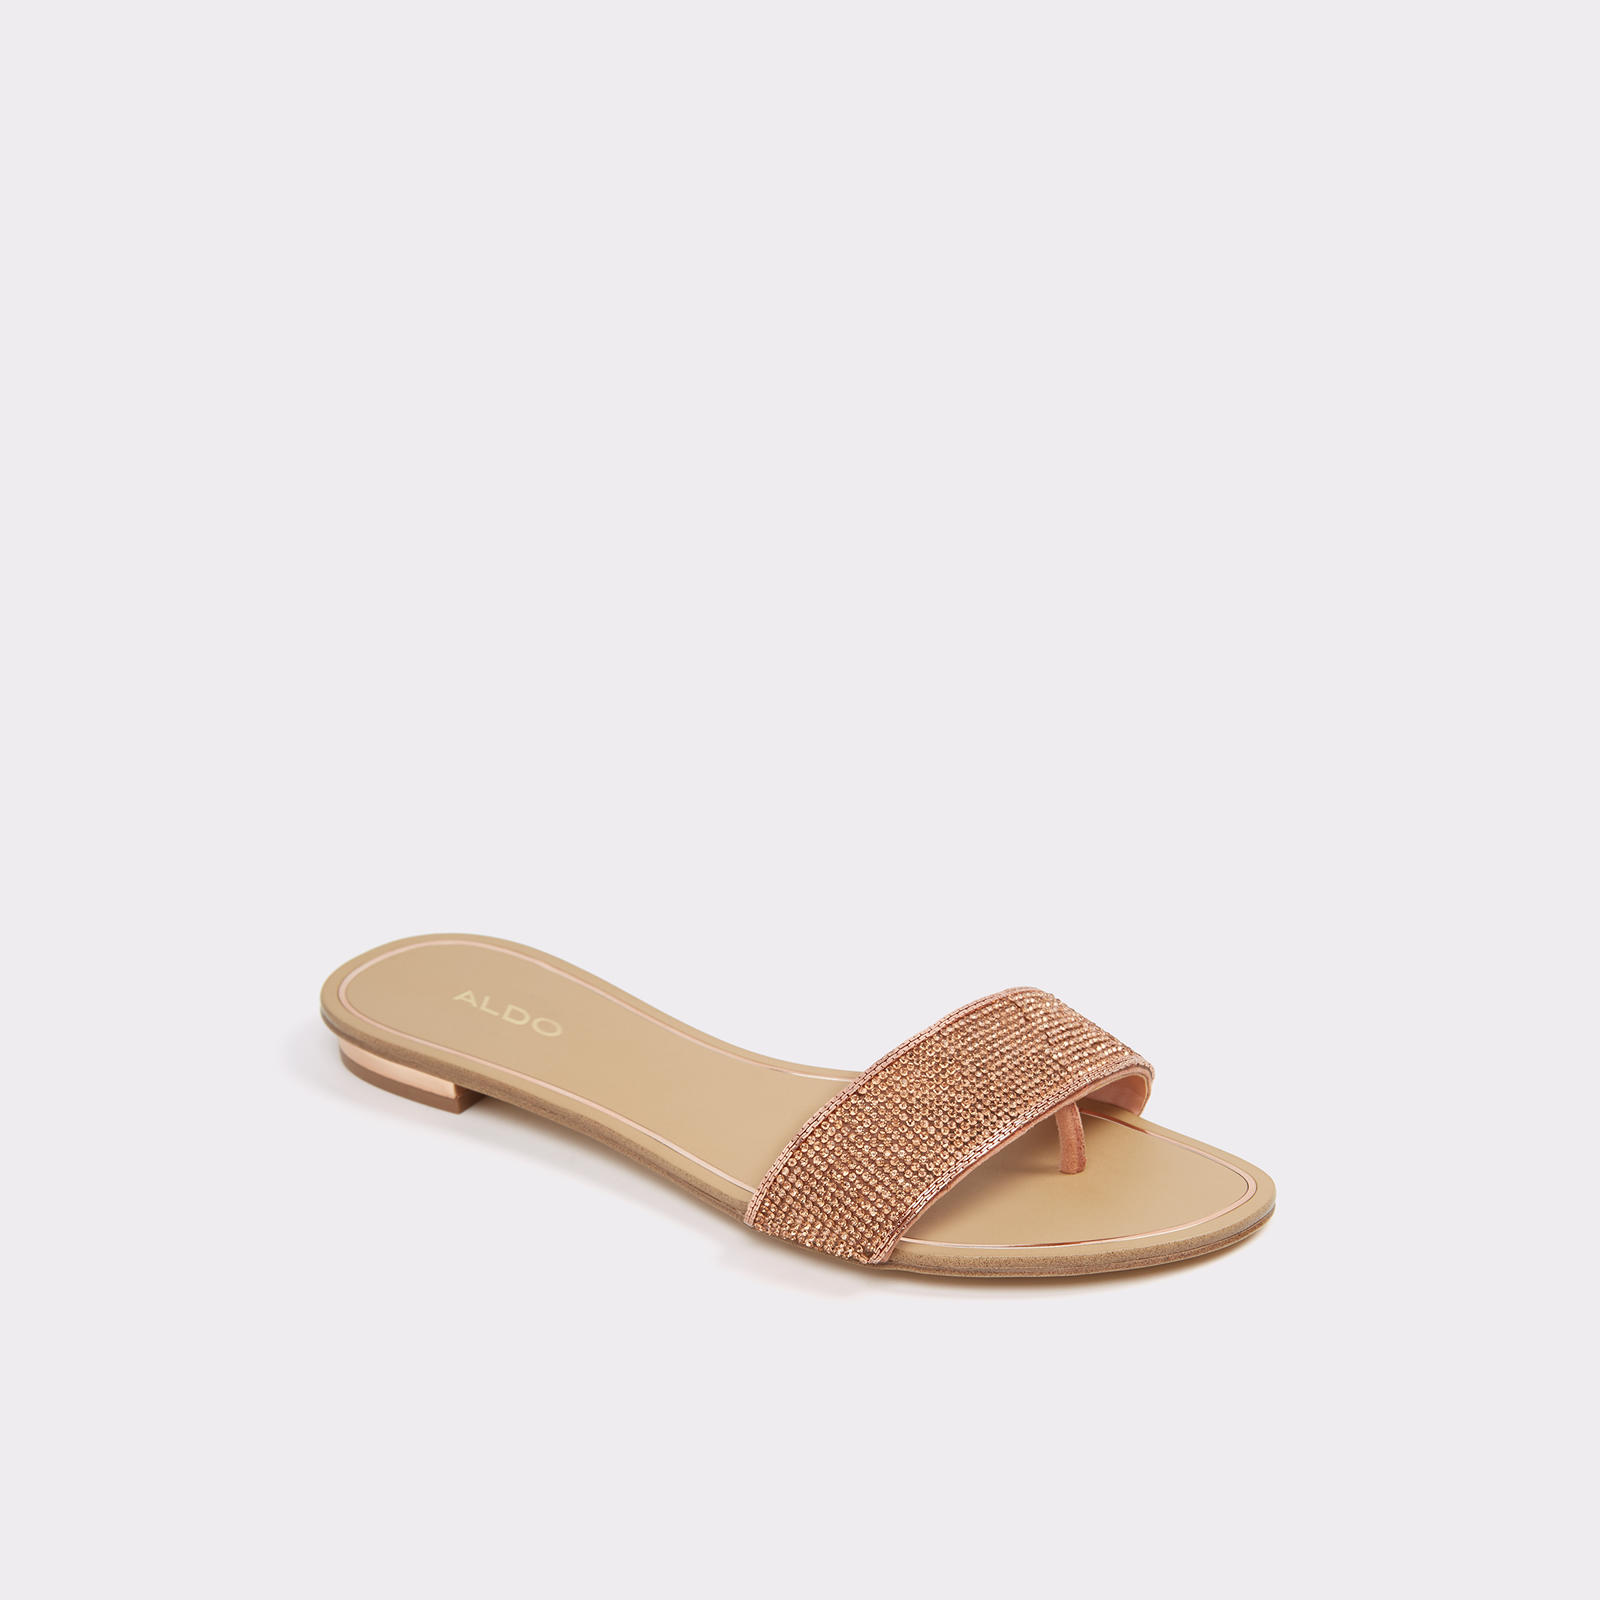 72 Trending Women's Spring Sandals (as low as $19!) — The Overwhelmed ...